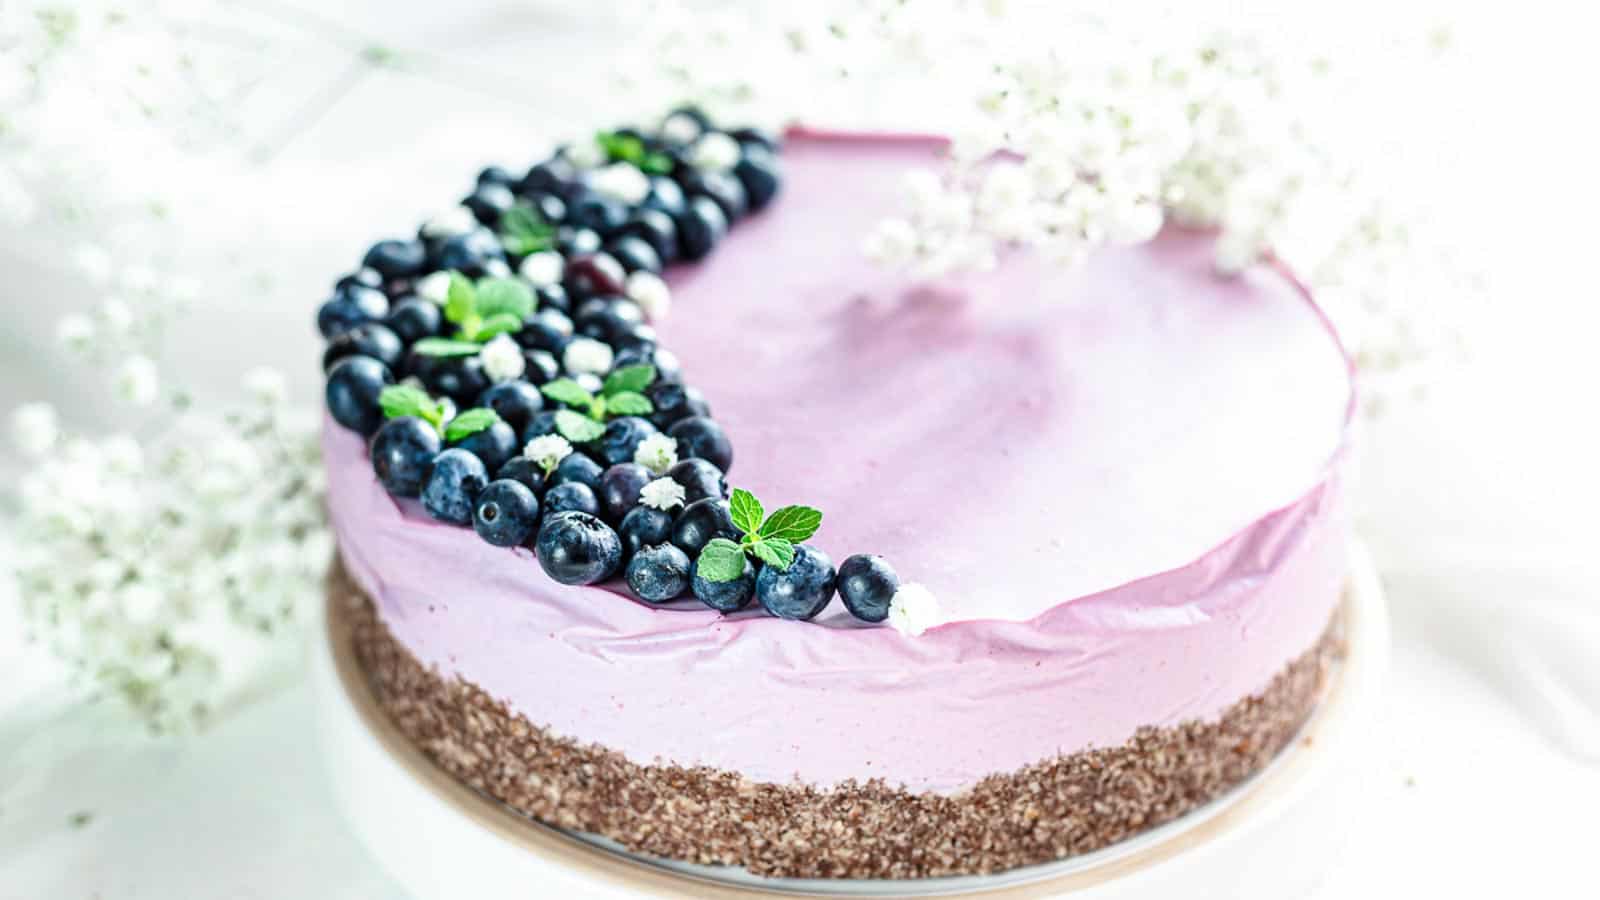 Keto No Bake Blueberry Cheesecake with blueberries on top. 